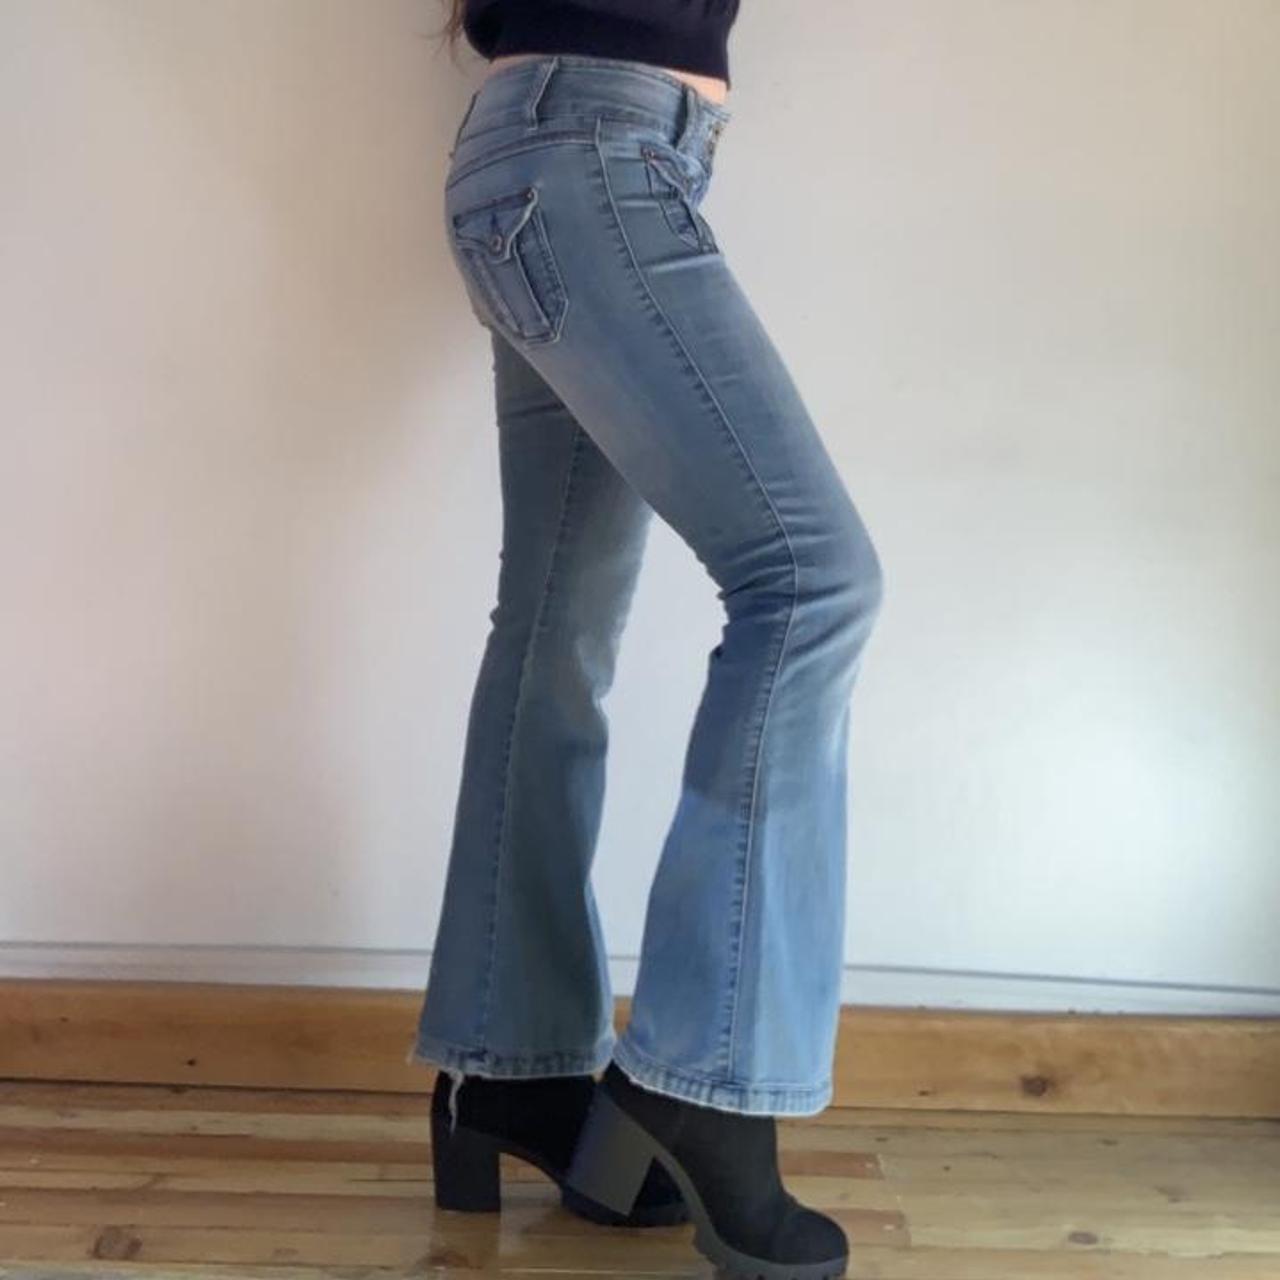 Stunning Y2k 70s style Jane Norman flared/bootcut... - Depop